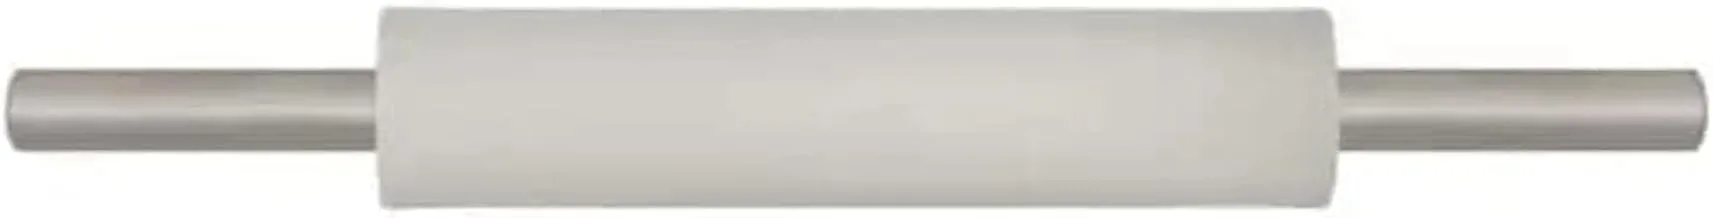 Alsaif Gallery Silicon Dough Rollers With Steel Handle, 20 cm Size